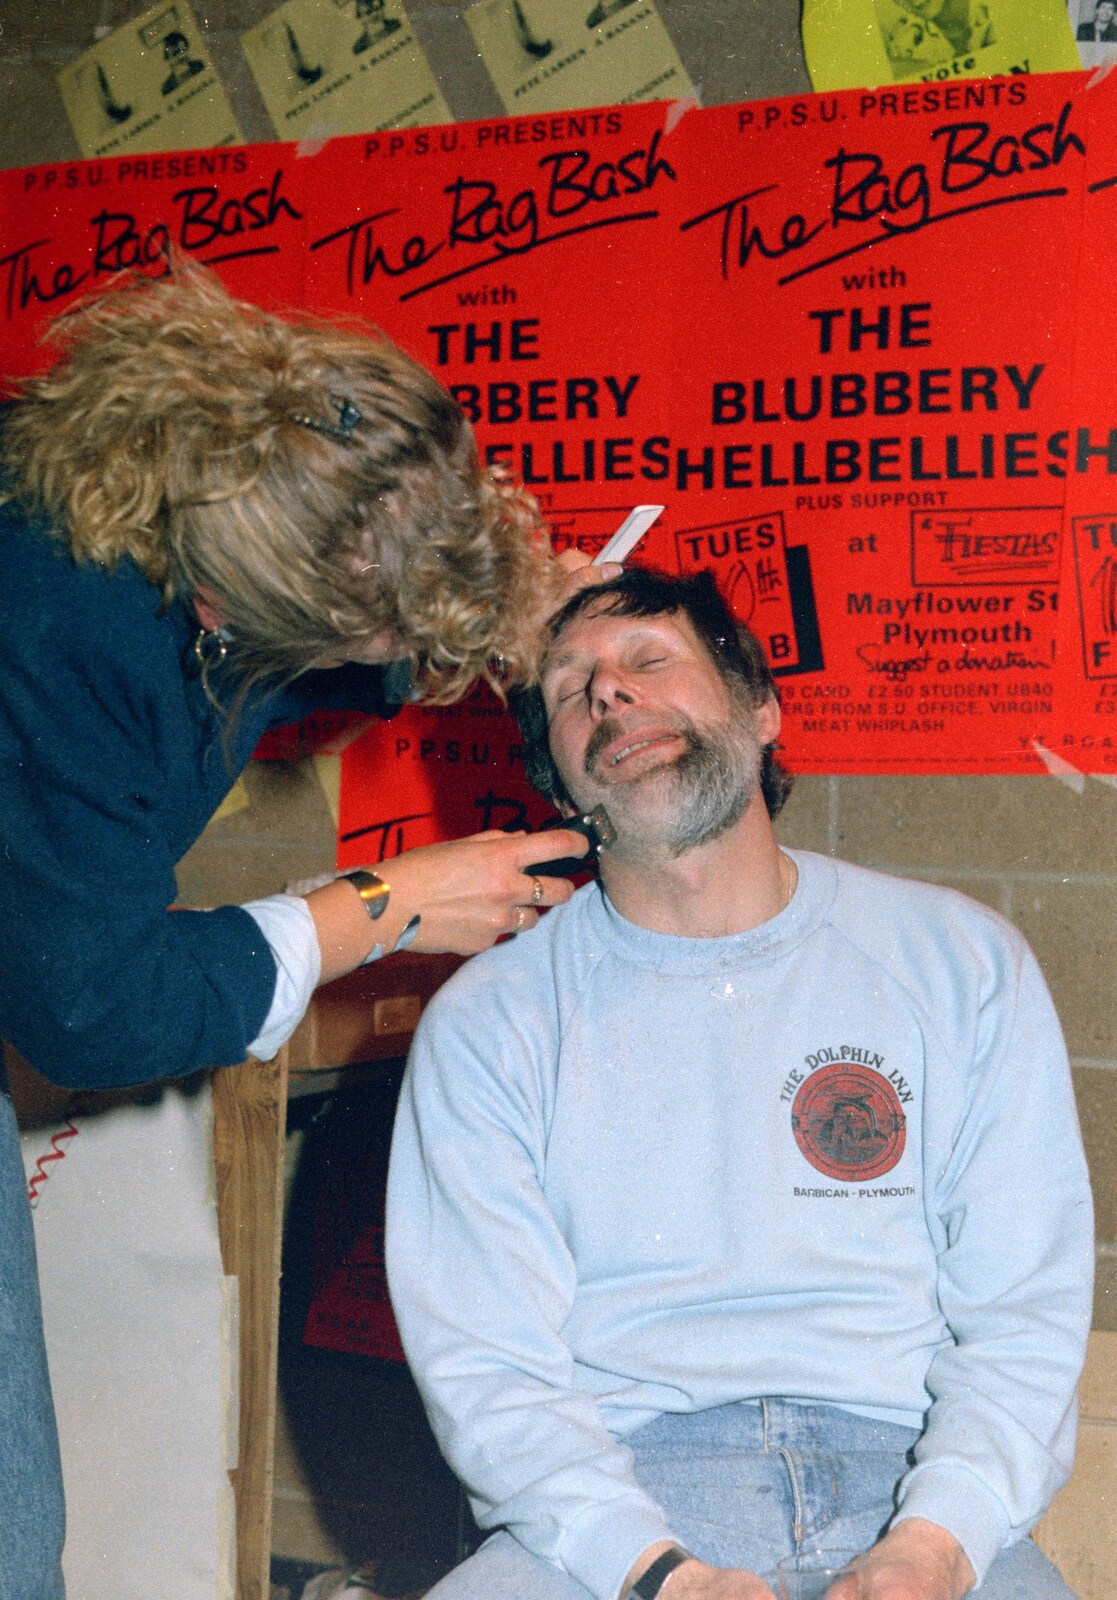 Brian gets his beard shaved off from Uni: Pirate RAG Bash, Games Nights and Brian's Beard, PPSU, Plymouth - 10th February 1987